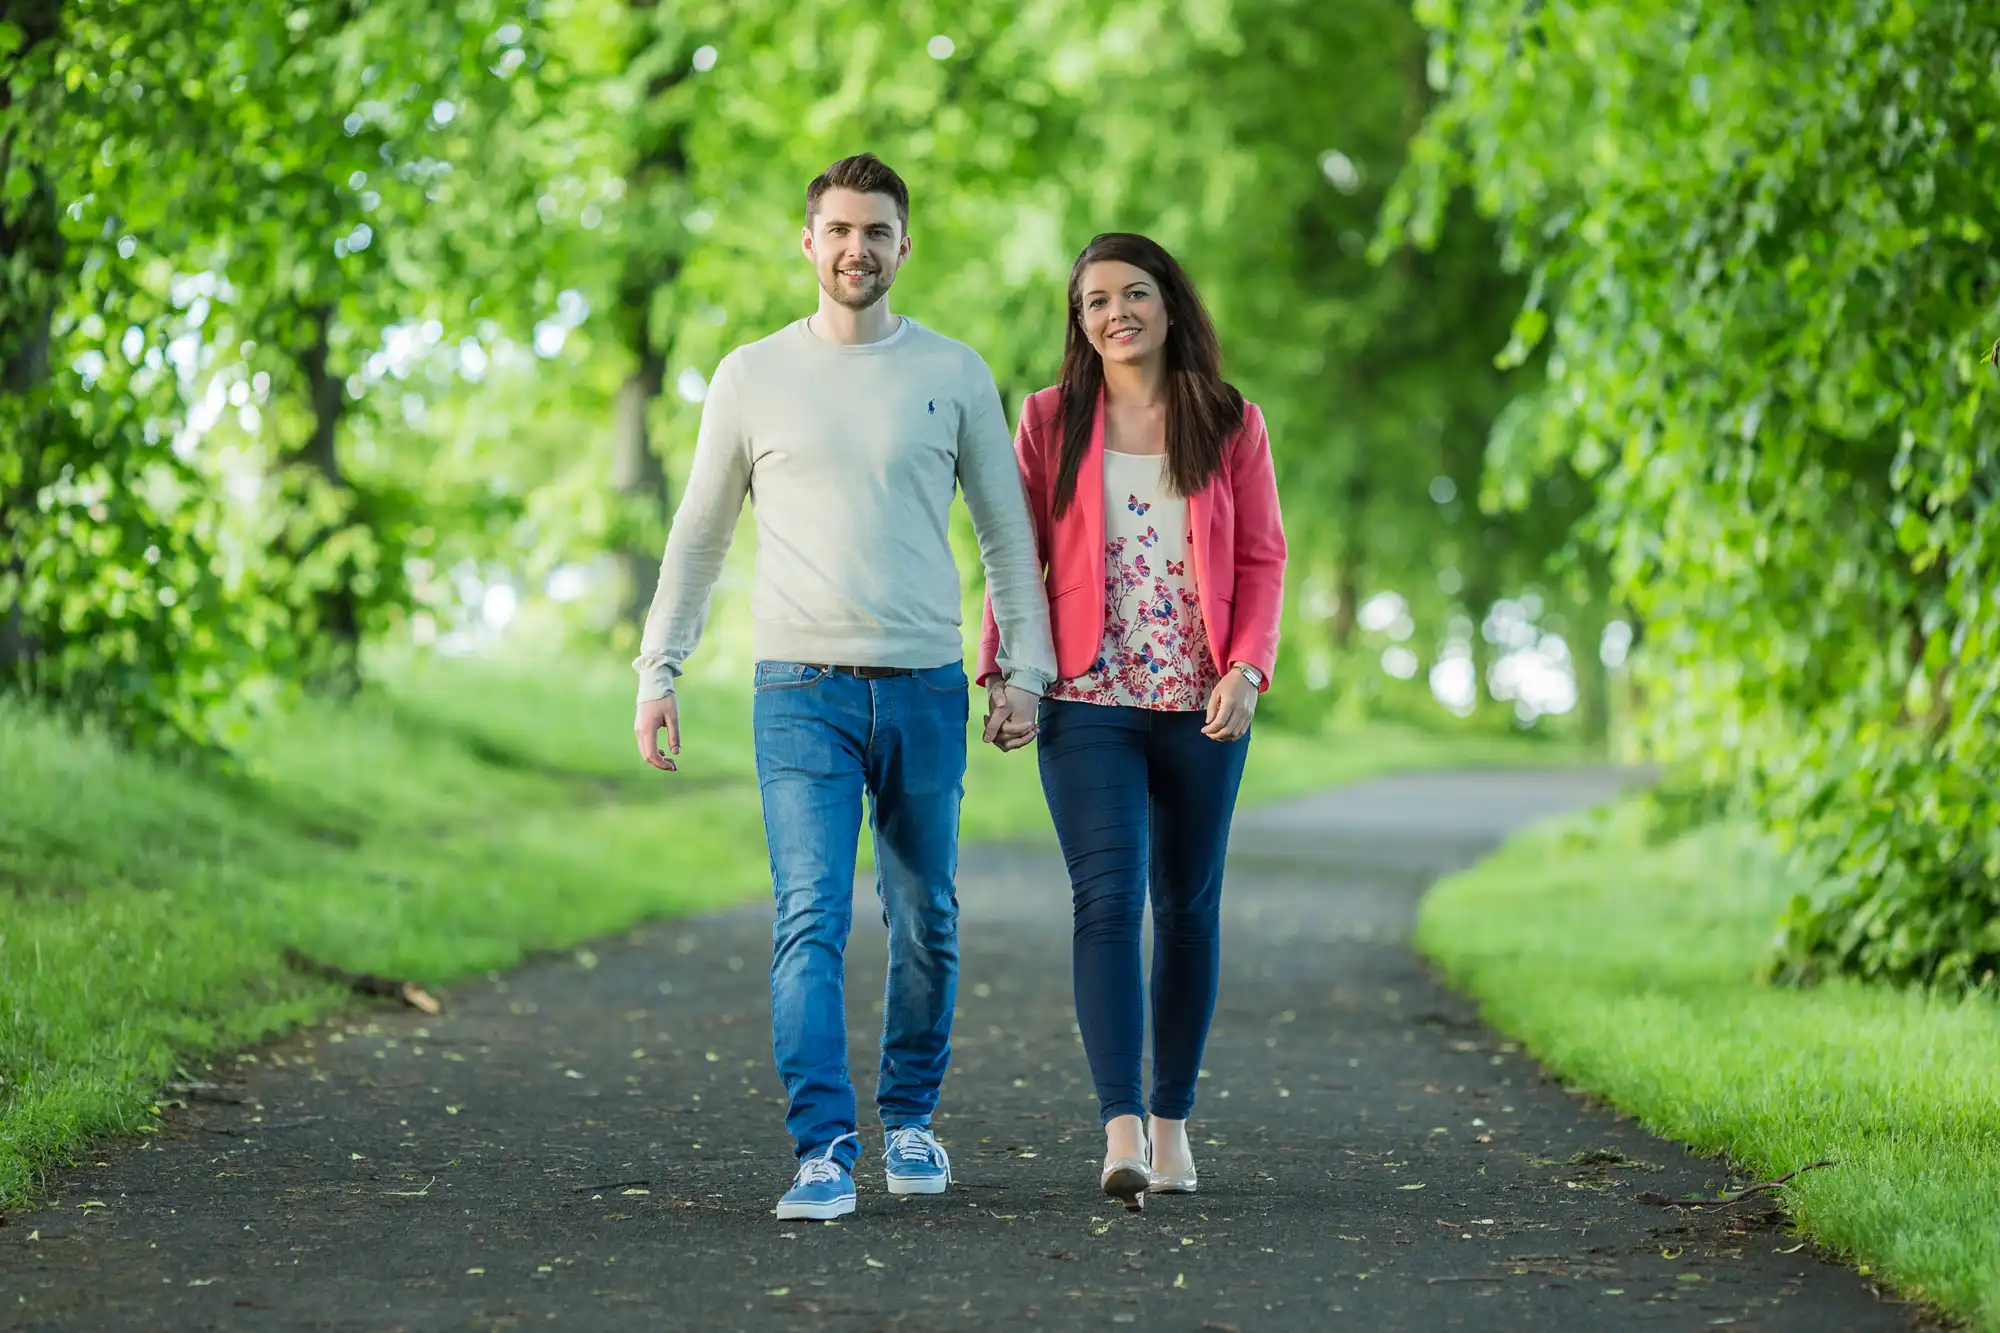 A young couple happily walking hand in hand along a tree-lined path in a green park.